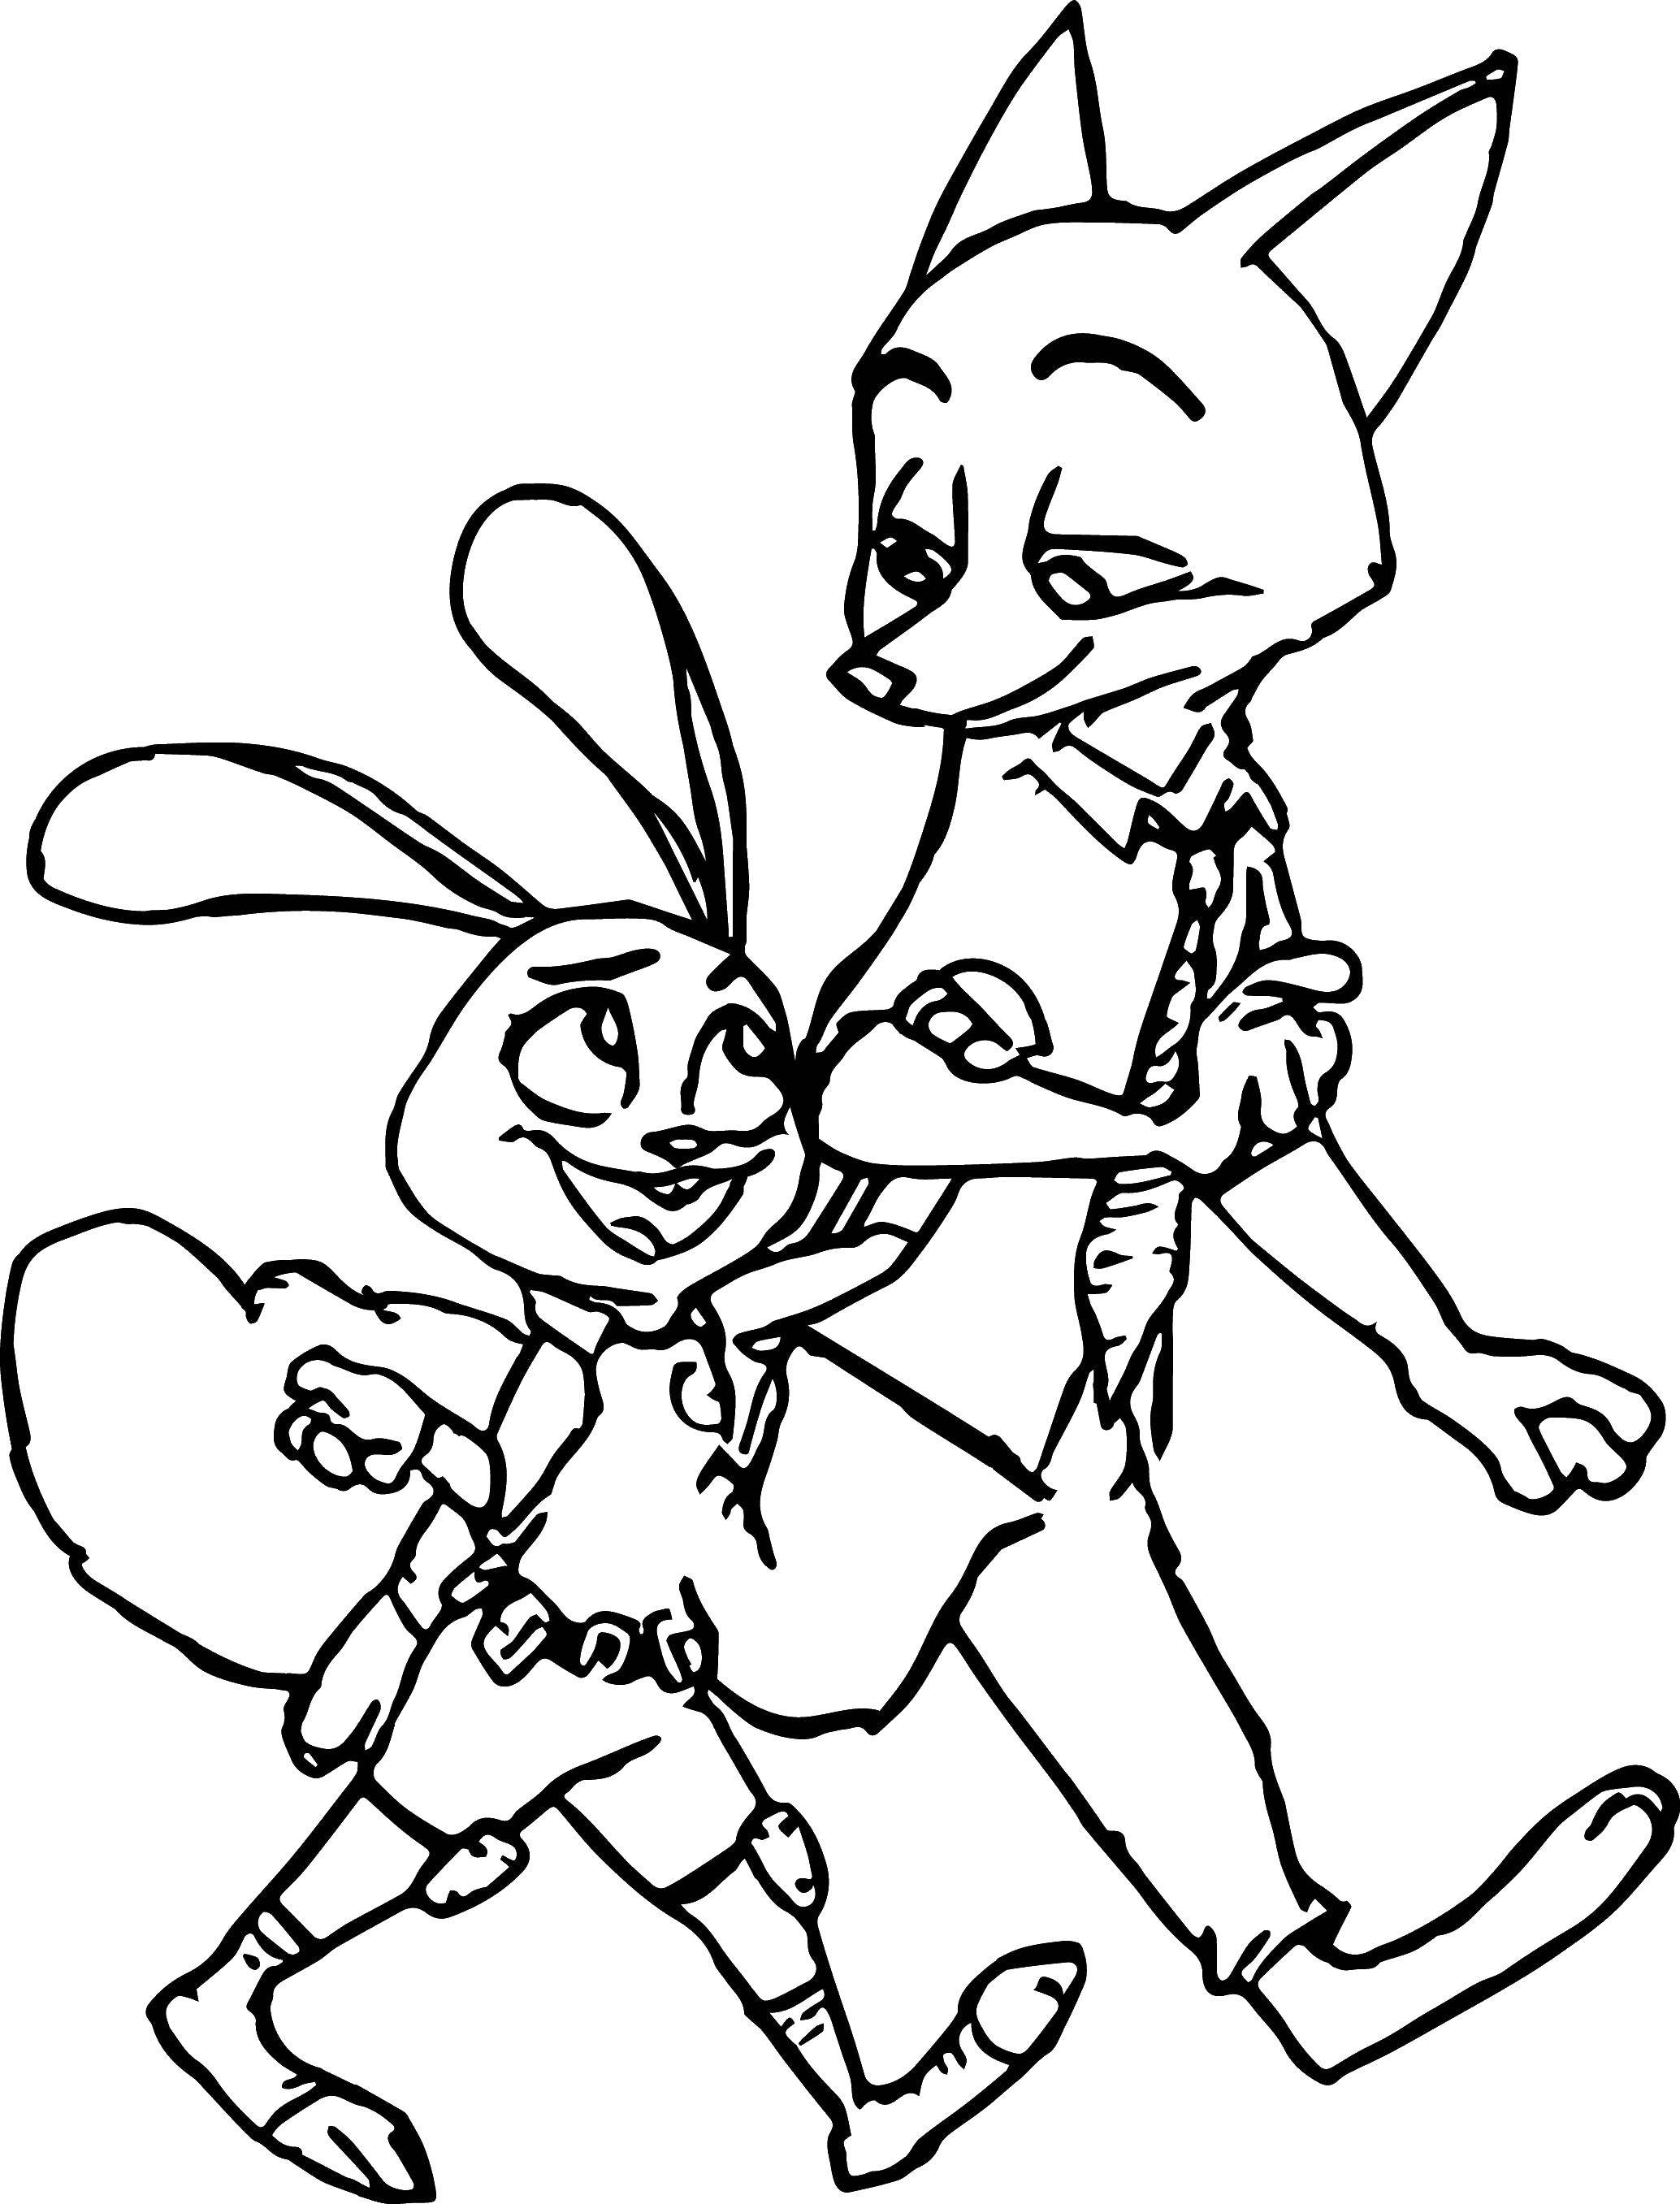 Coloring Rabbit Judy. and Fox nick Wilde. Category Zeropolis. Tags:  Zeropolis, rabbit Judy. Fox Nick Wilde.